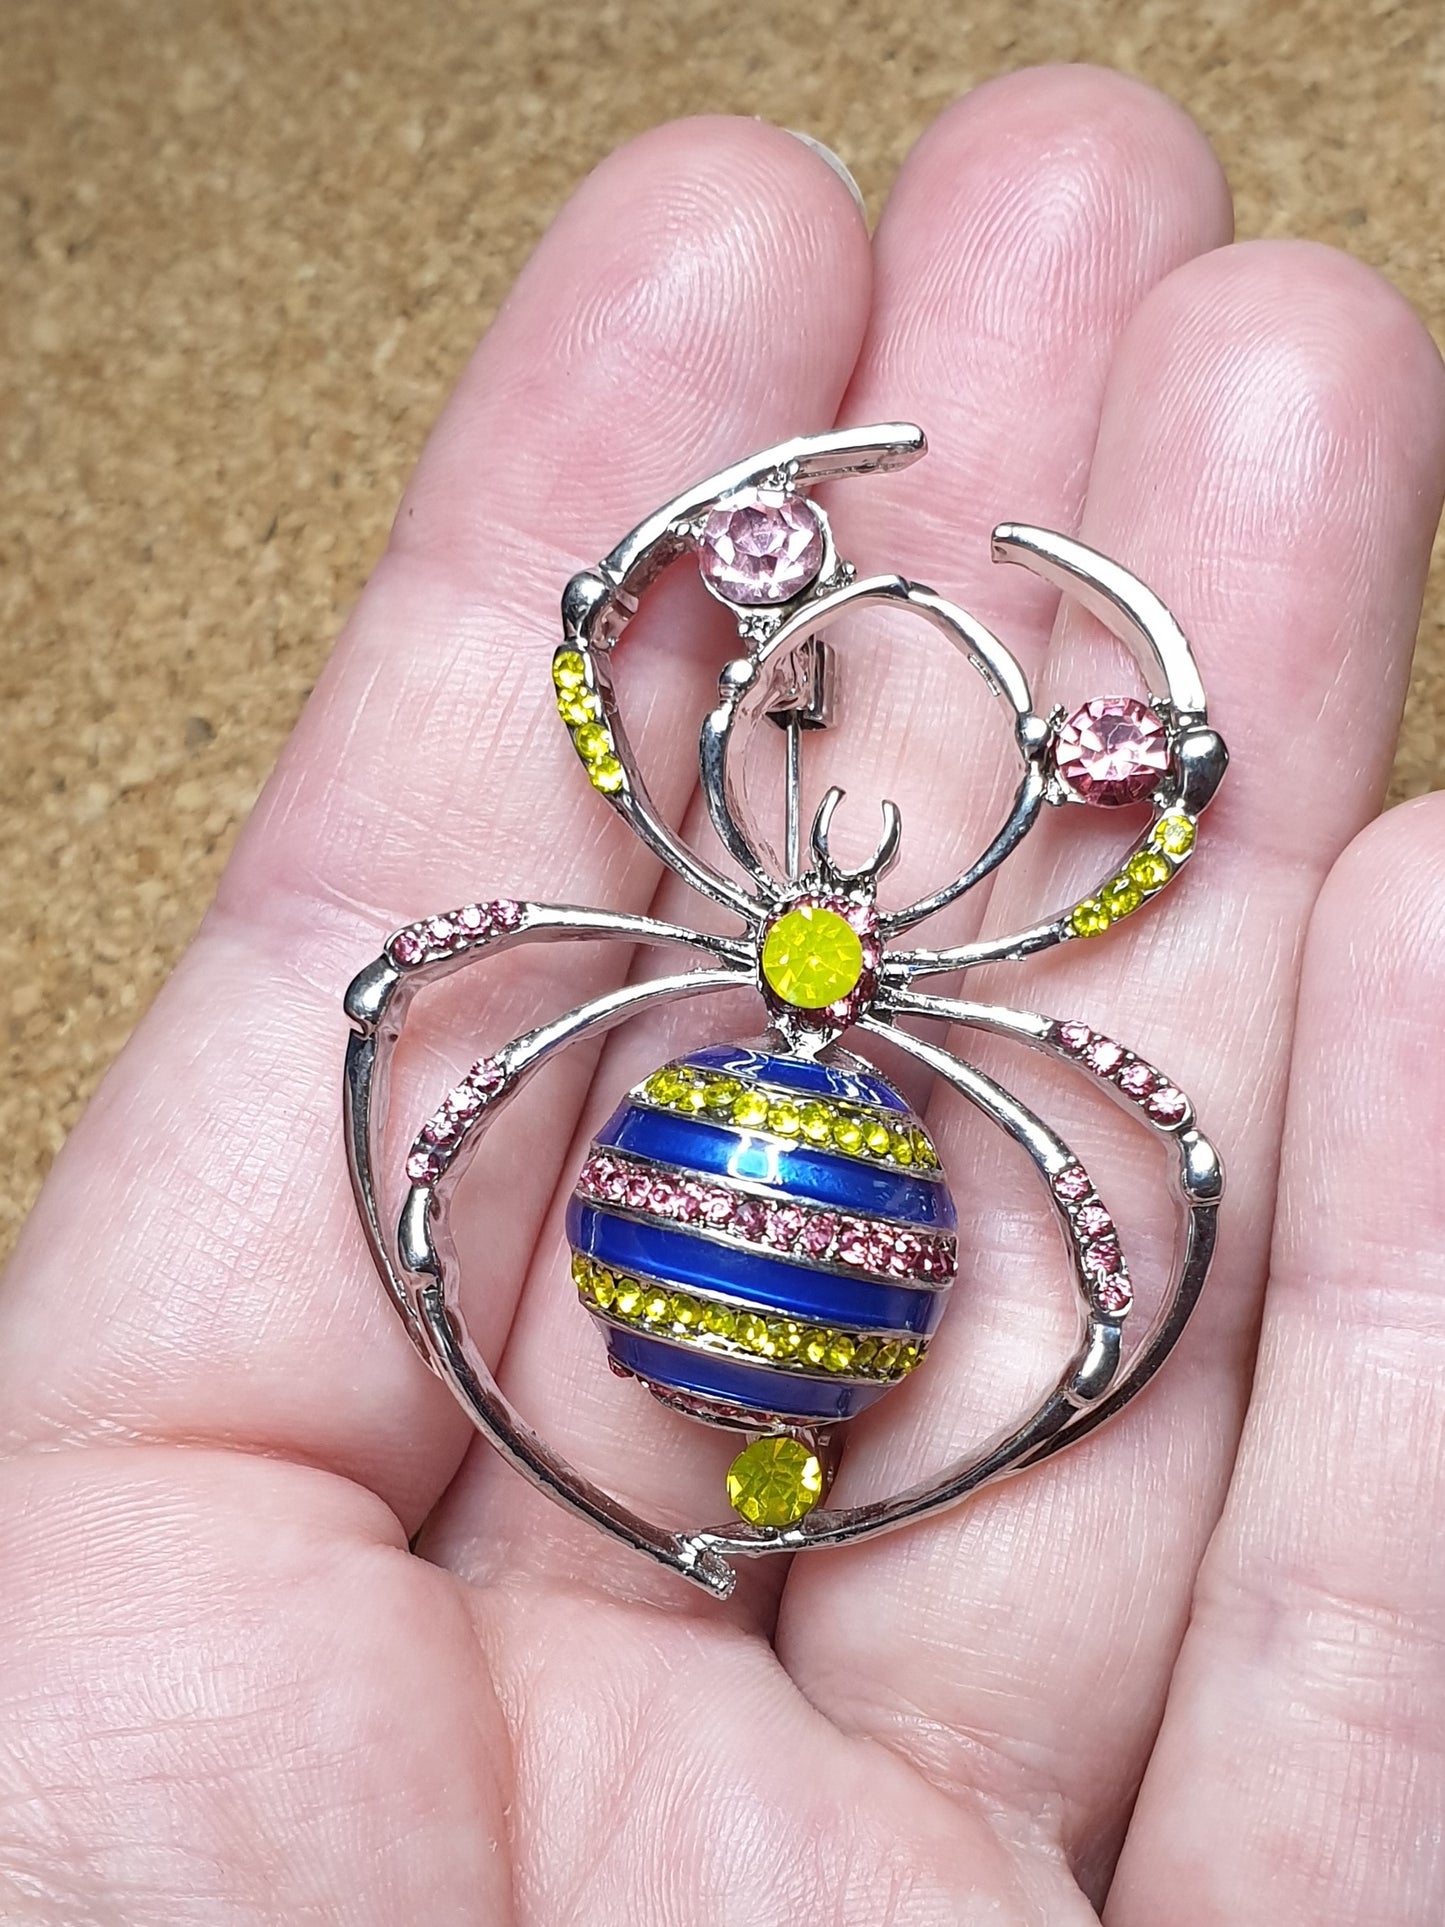 Spider Brooch - Blue Yellow Pink